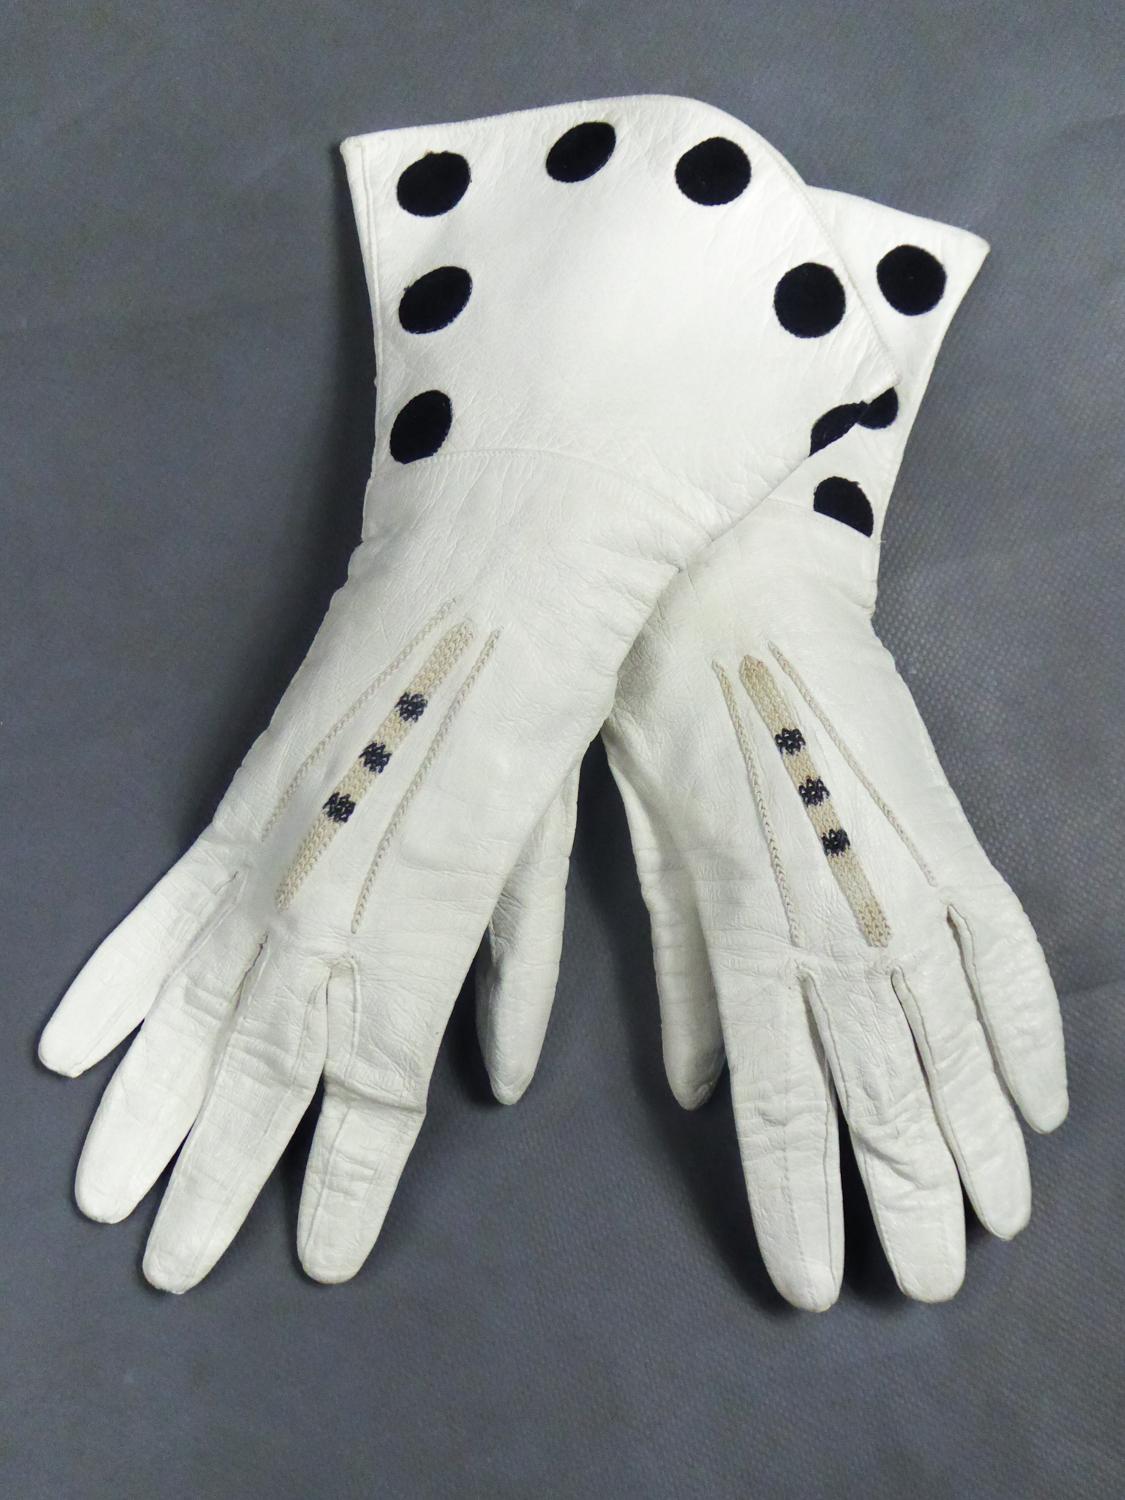 Circa 1950-1960
France

Beautiful pair of ceremonial gloves in white chamois leather with unreadable French stamp inside and dating from the 1950s. Elegant embroidery of black cotton pellets using chain stitch. As new, probably never worn. Excellent